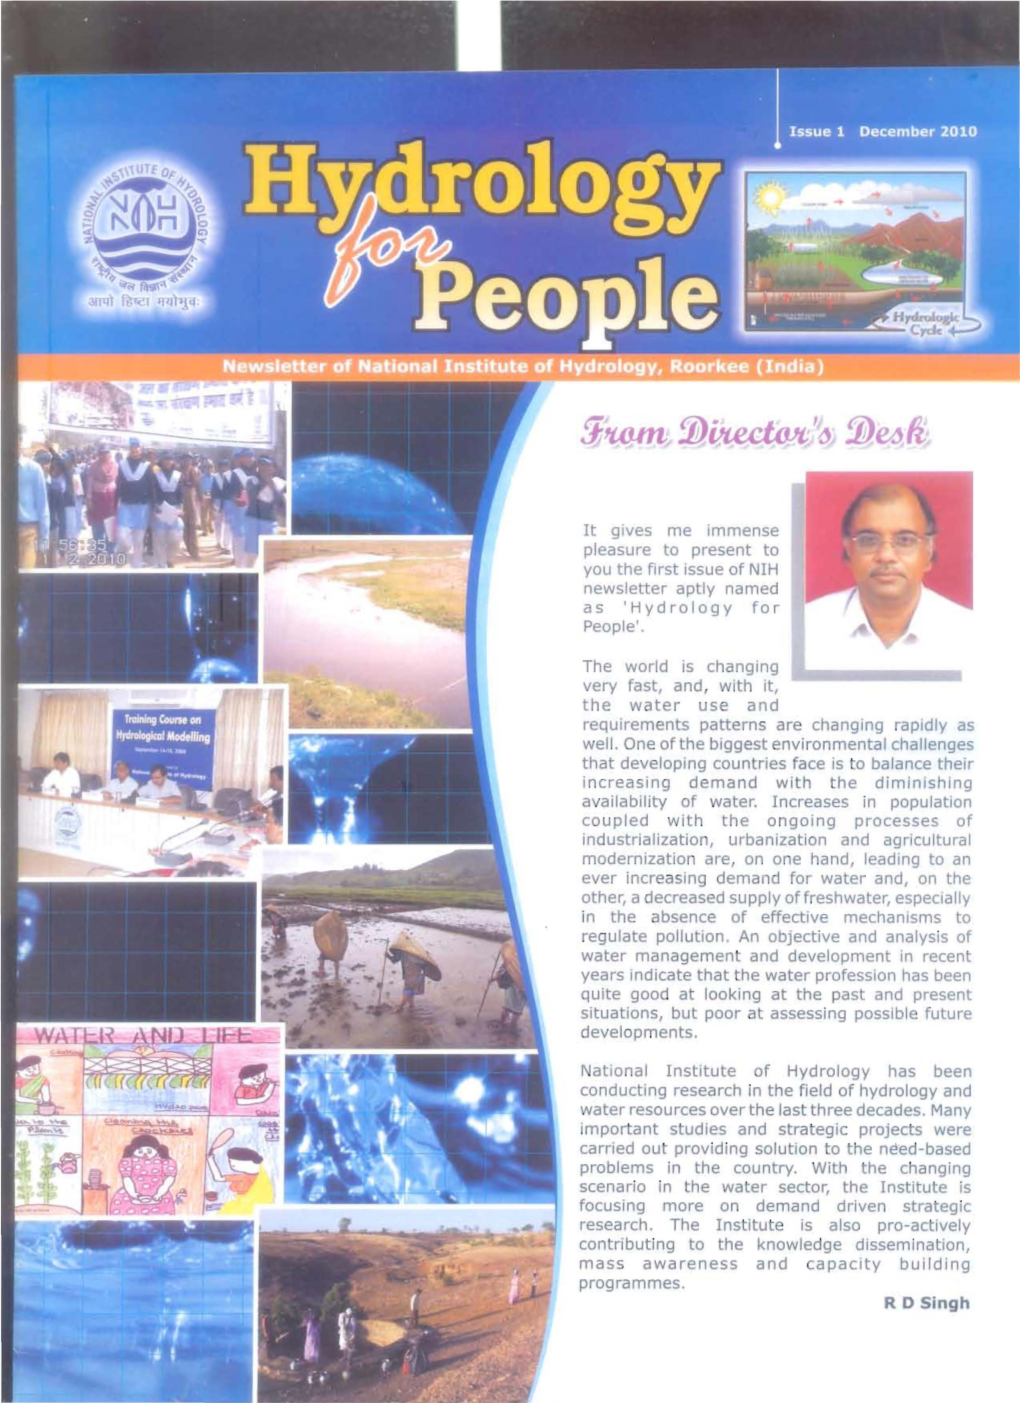 It Gives Me Immense Pleasure to Present to You the First Issue of NIH Newsletter Aptly Named As 'Hydrology for People'